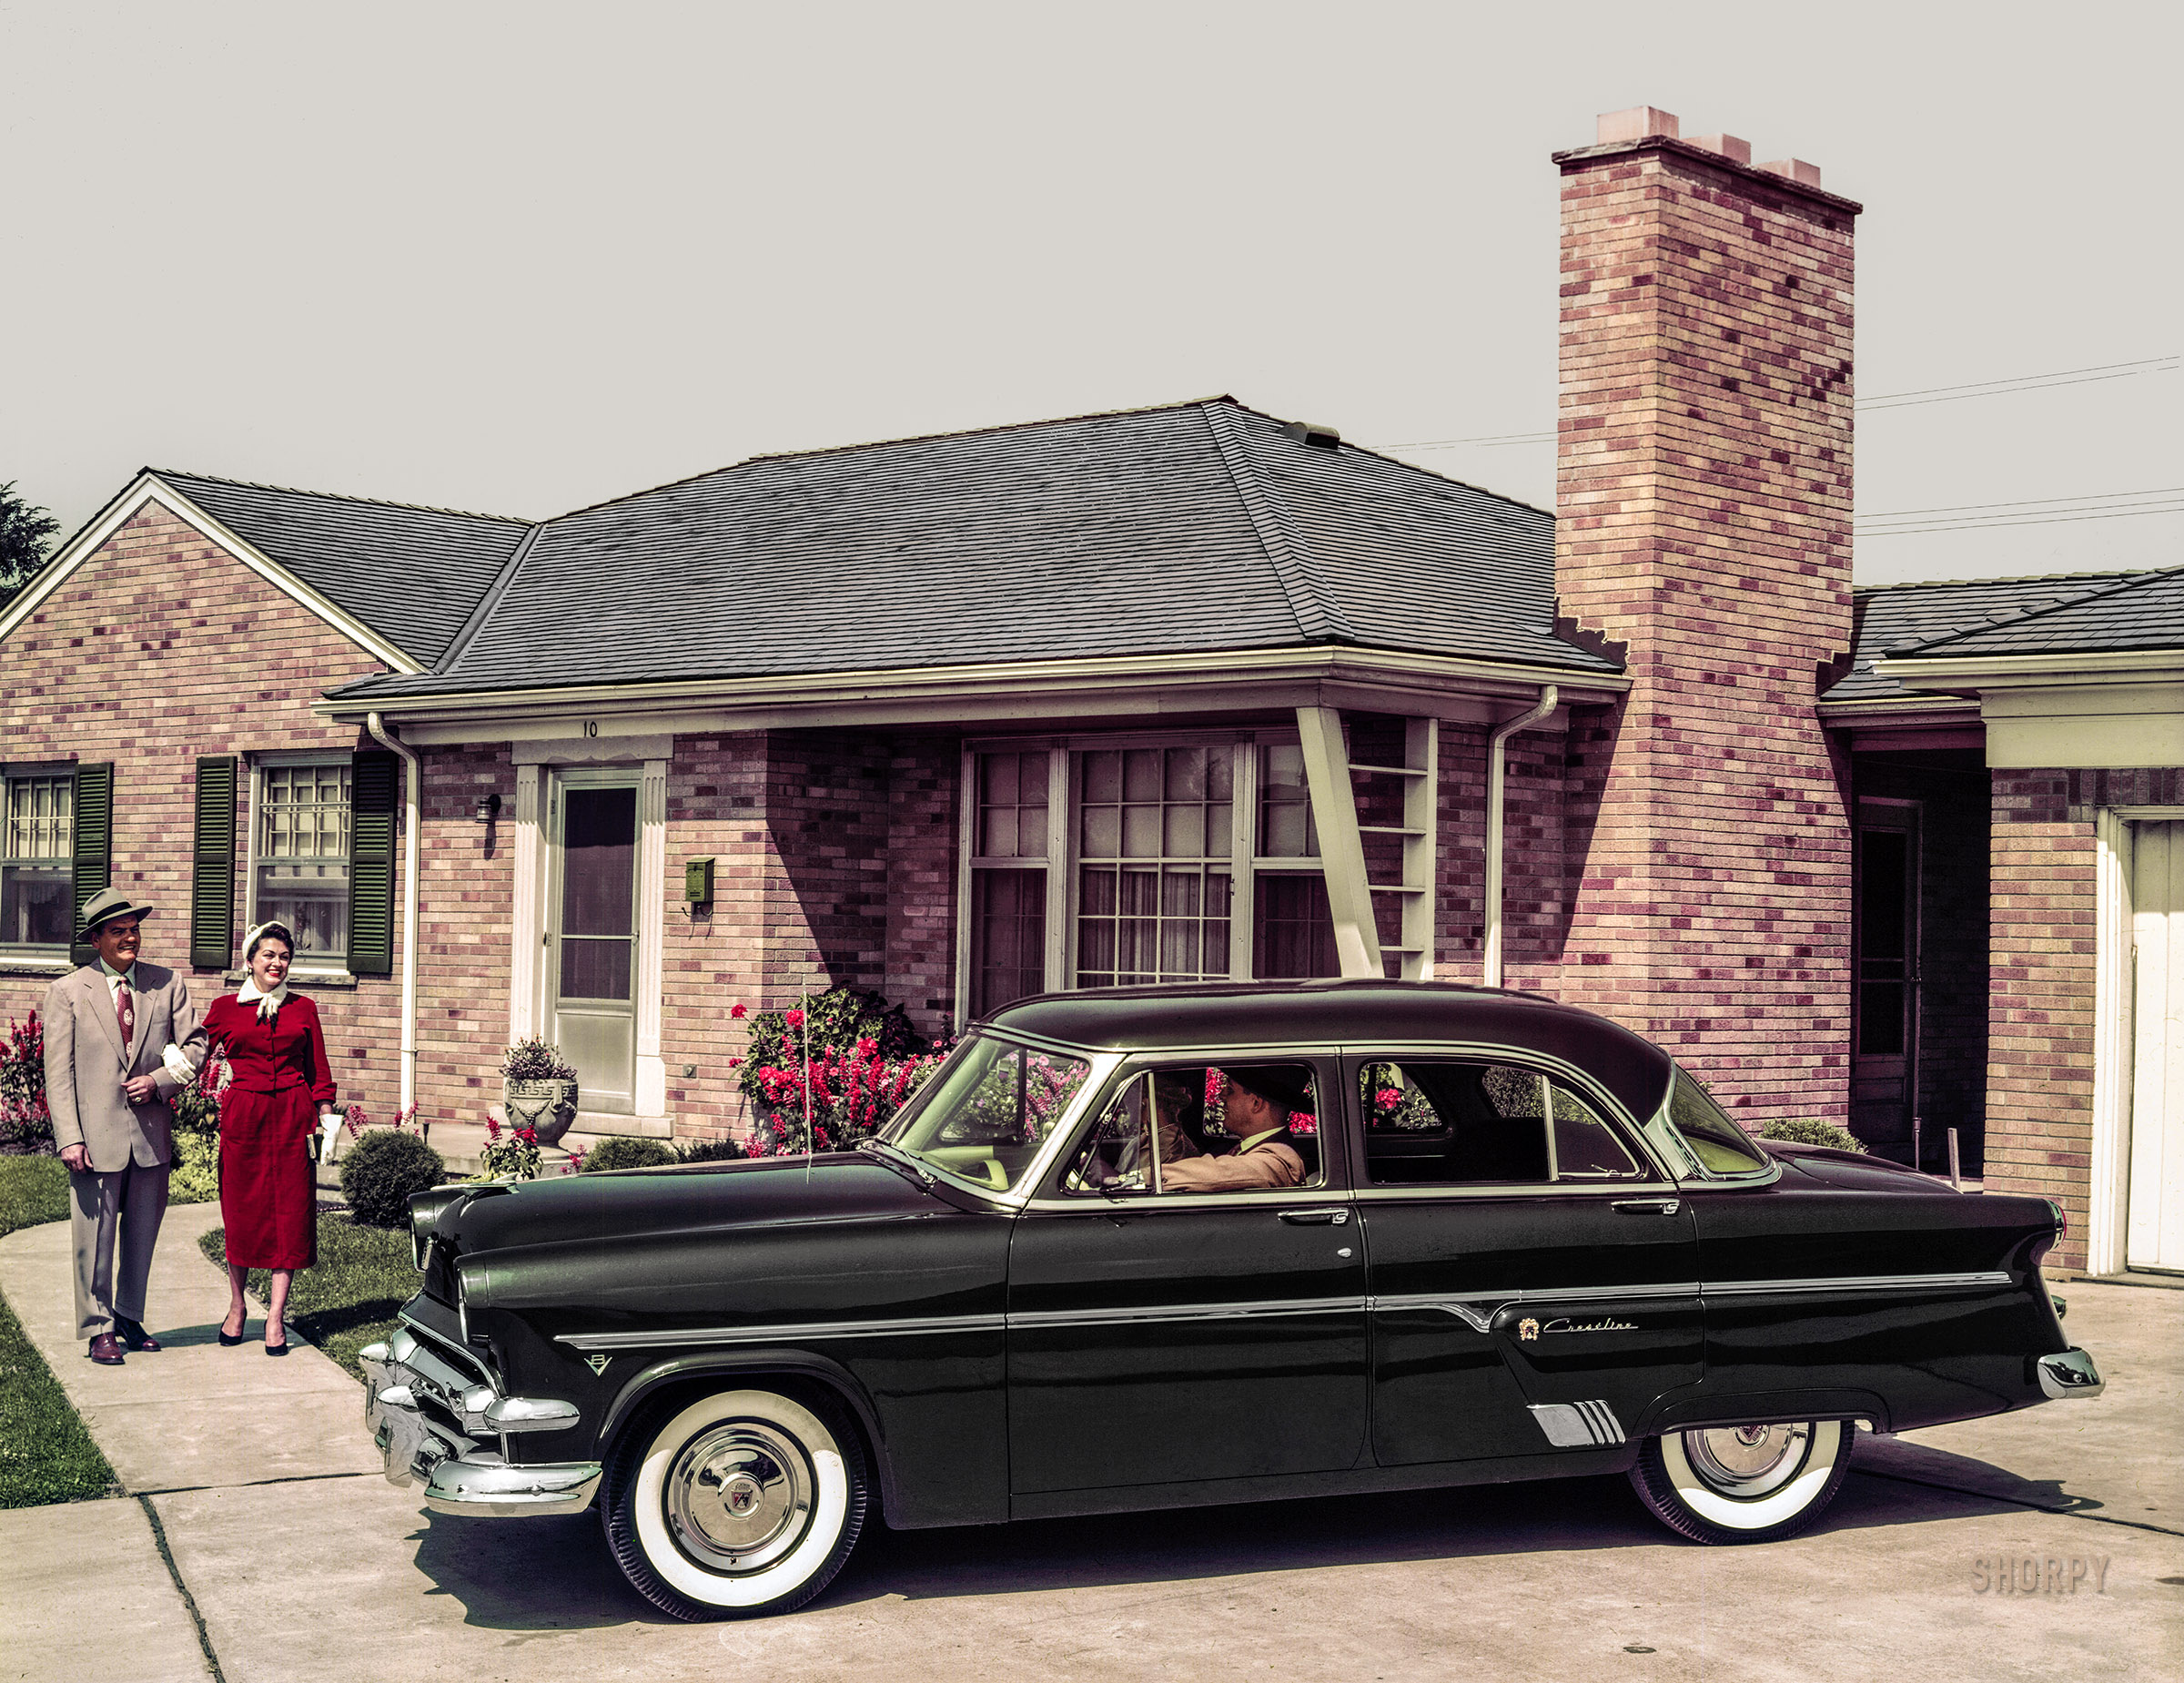 Dearborn, Michigan. "1954 Ford Crestline Fordor Sedan." With room in back for their 2.5 kids. Color transparency from the Ford Motor Co. photographic archives. View full size.